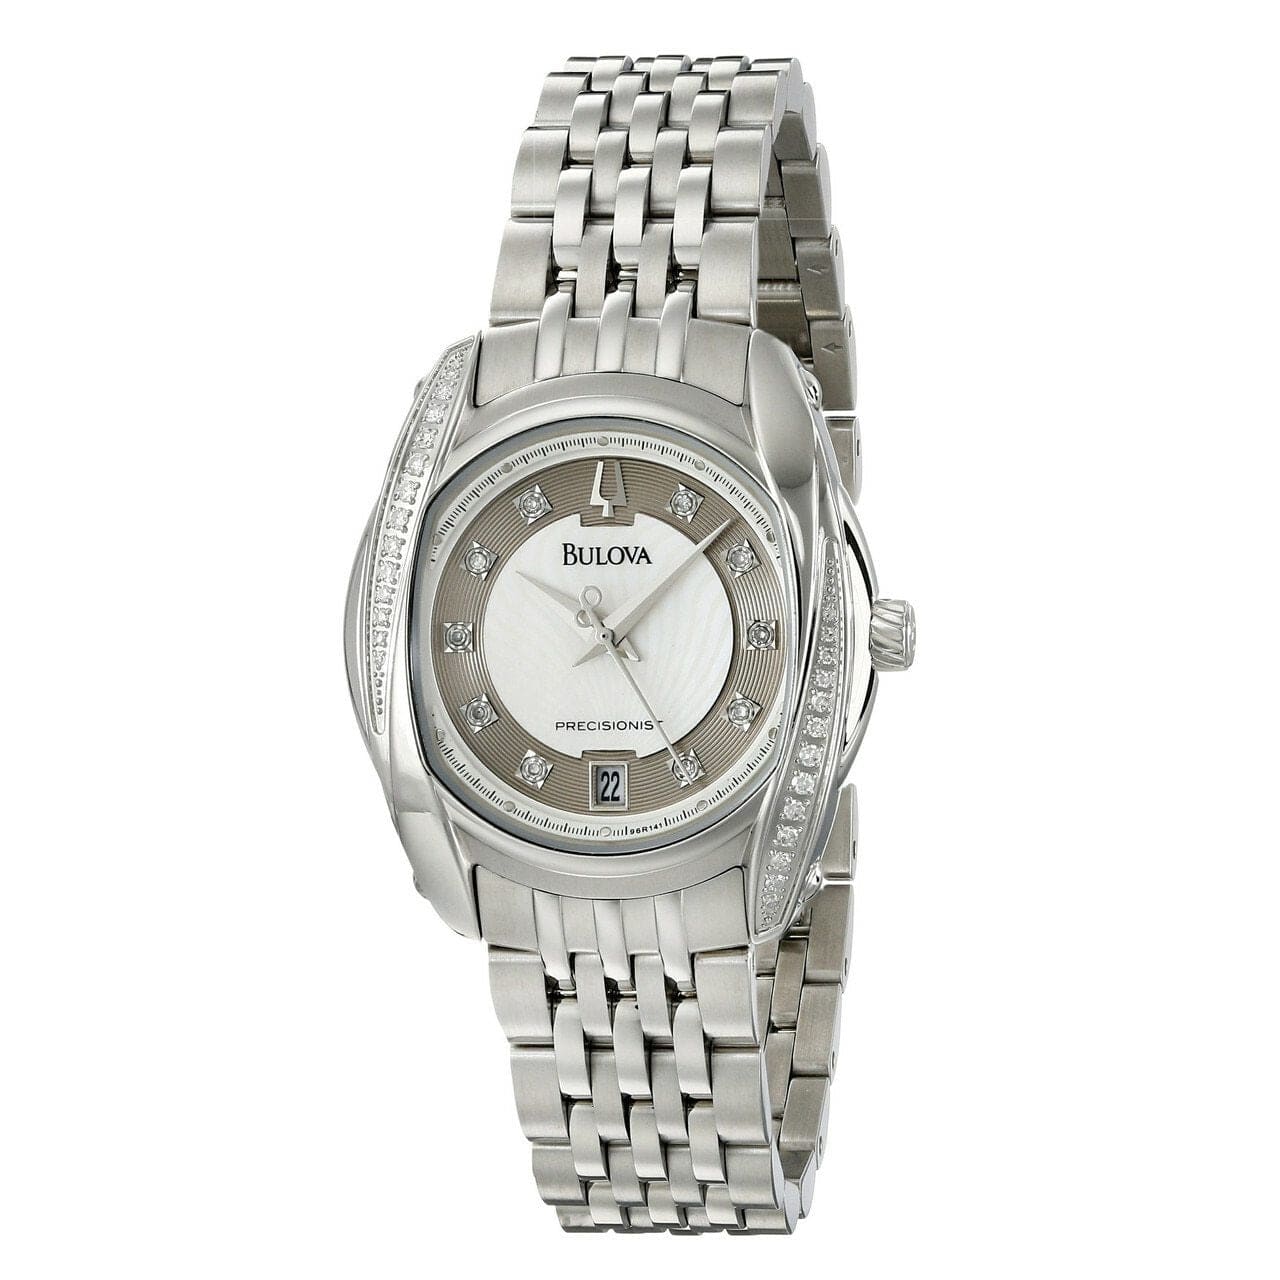 Bulova 96R141 Precisionist Silver Mother of Pearl Dial Women's Watch 042429464803